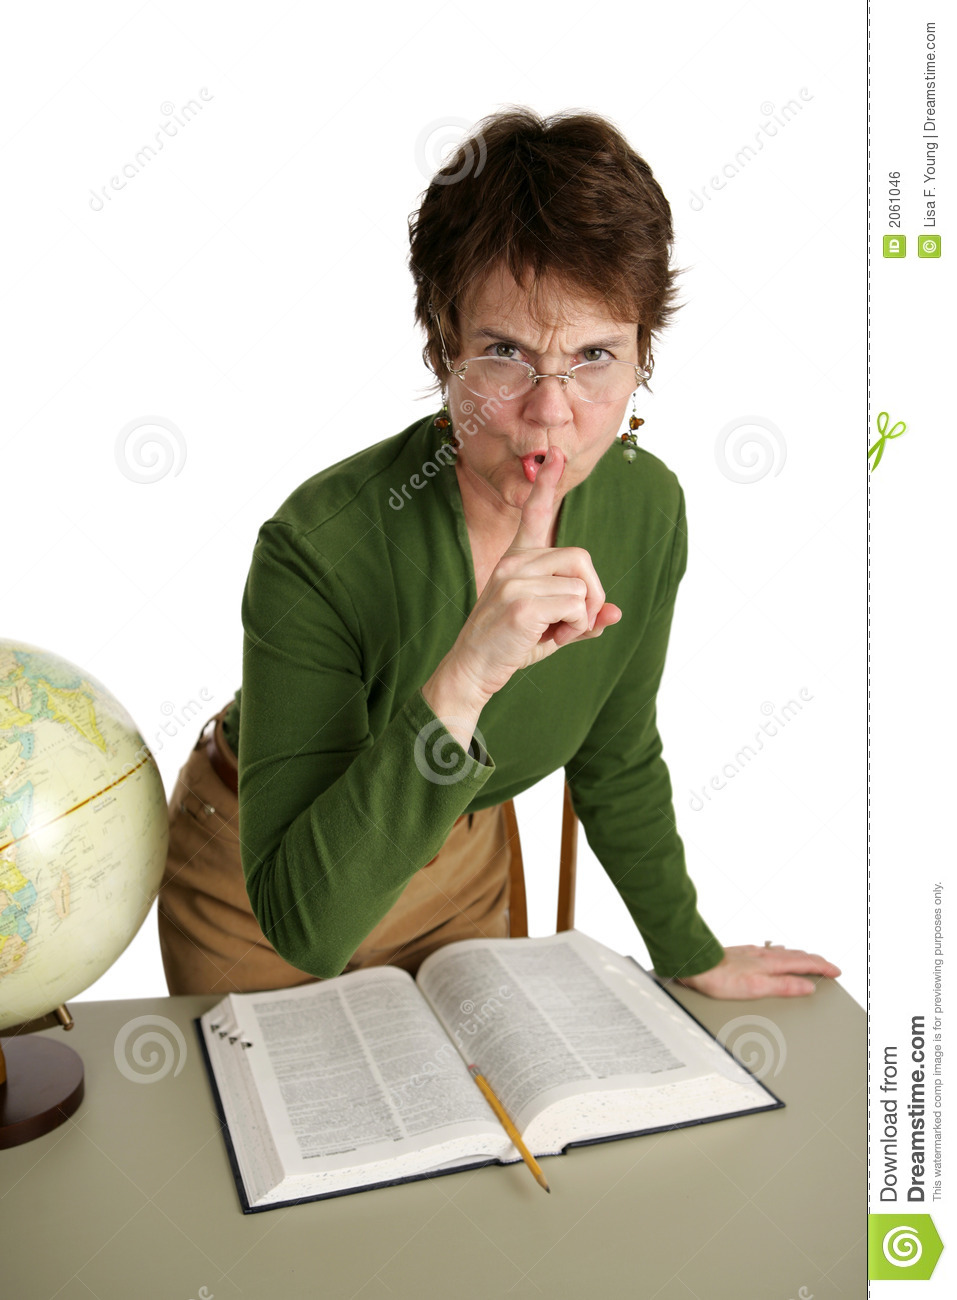 An Angry Librarian Telling You To Be Quiet  Isolated On White